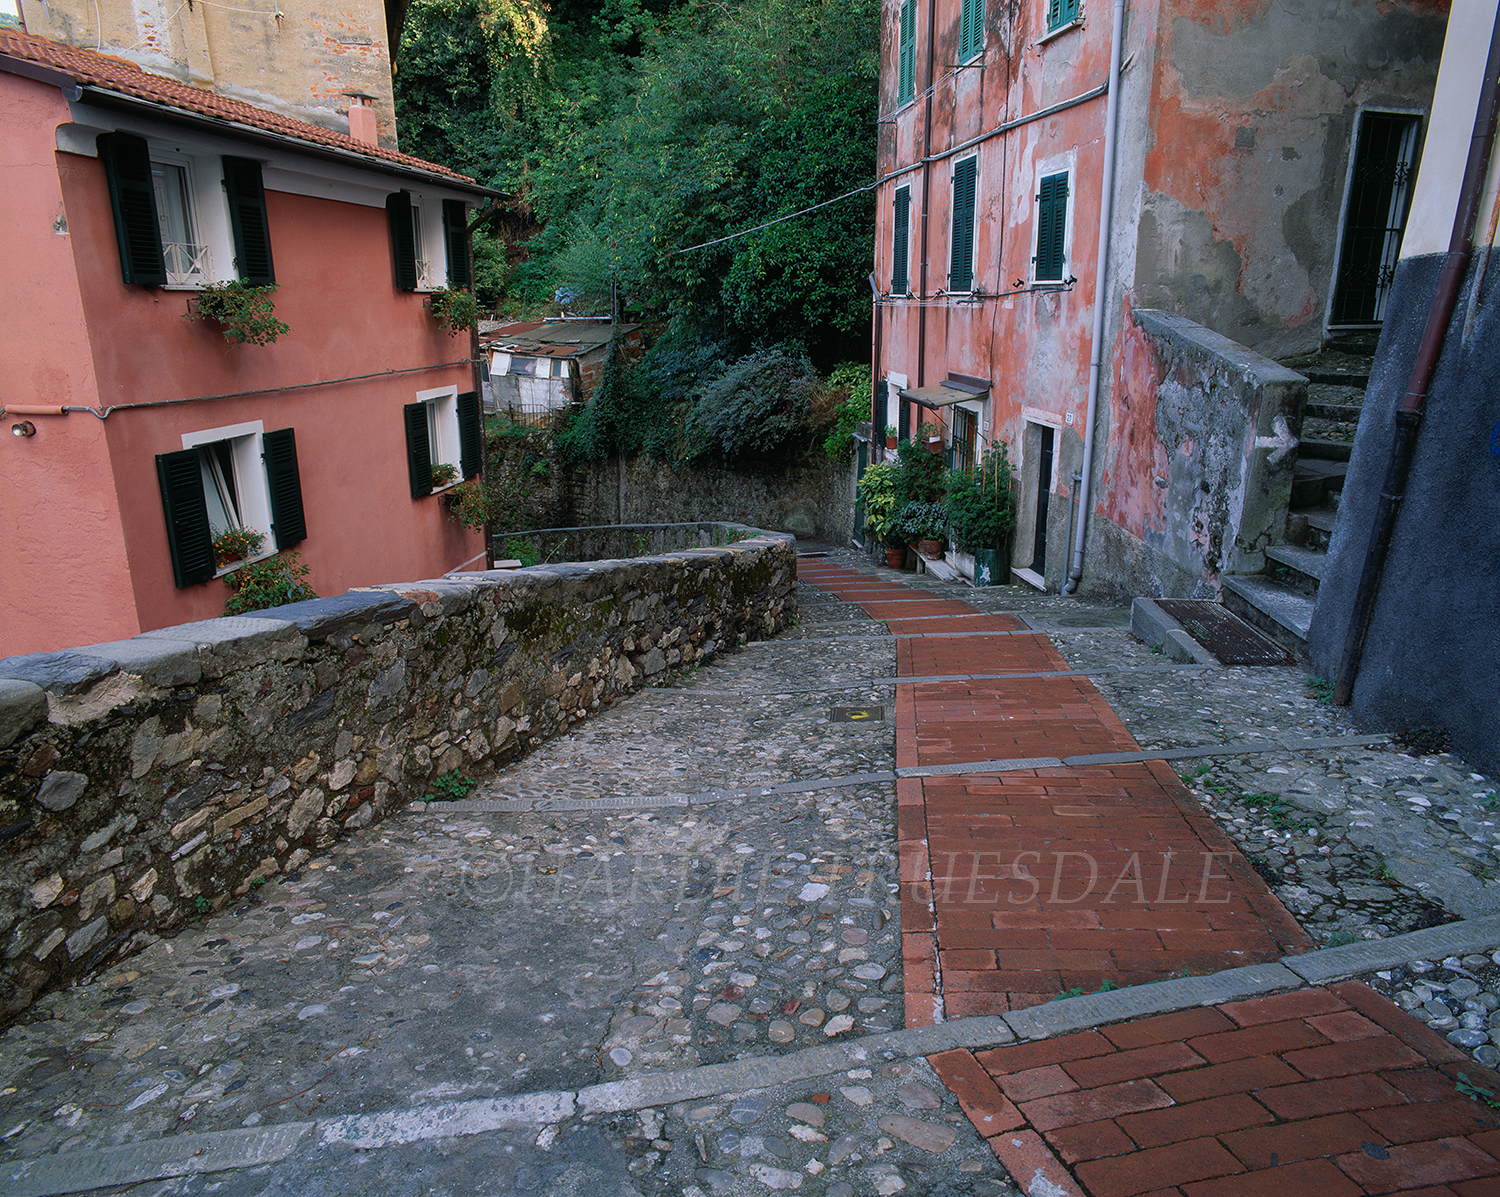  Ity#7 "Pretty in Pink", Lerici, Liguria, Italy 